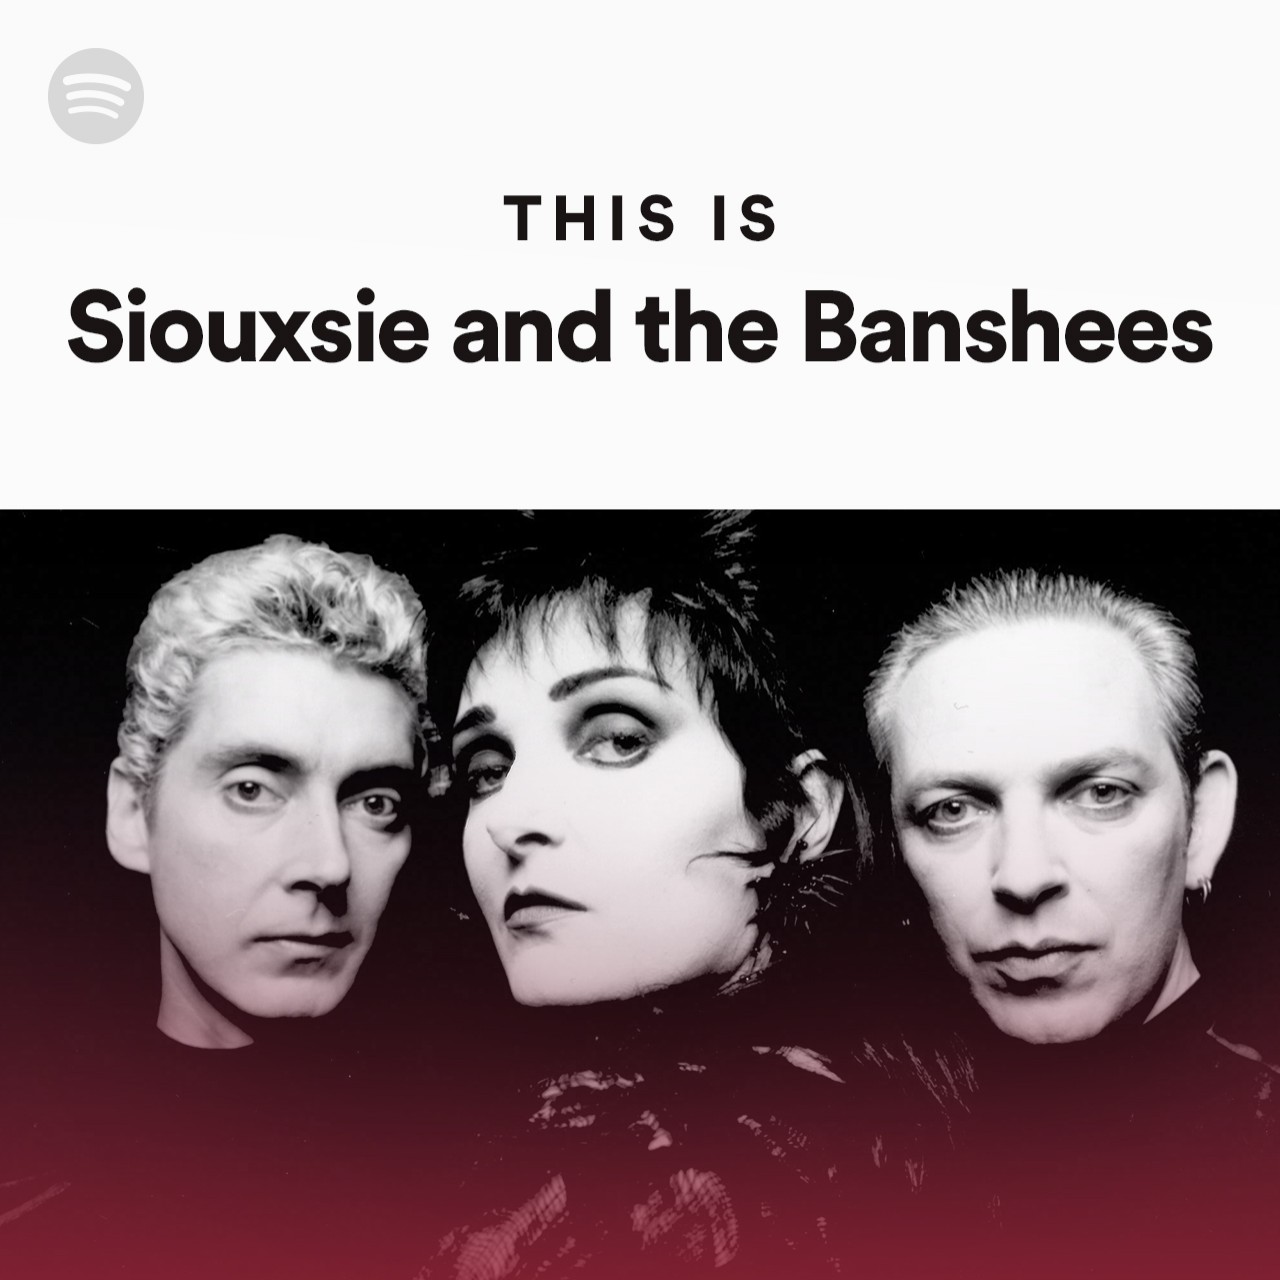 This Is Siouxsie and the Banshees Spotify Playlist